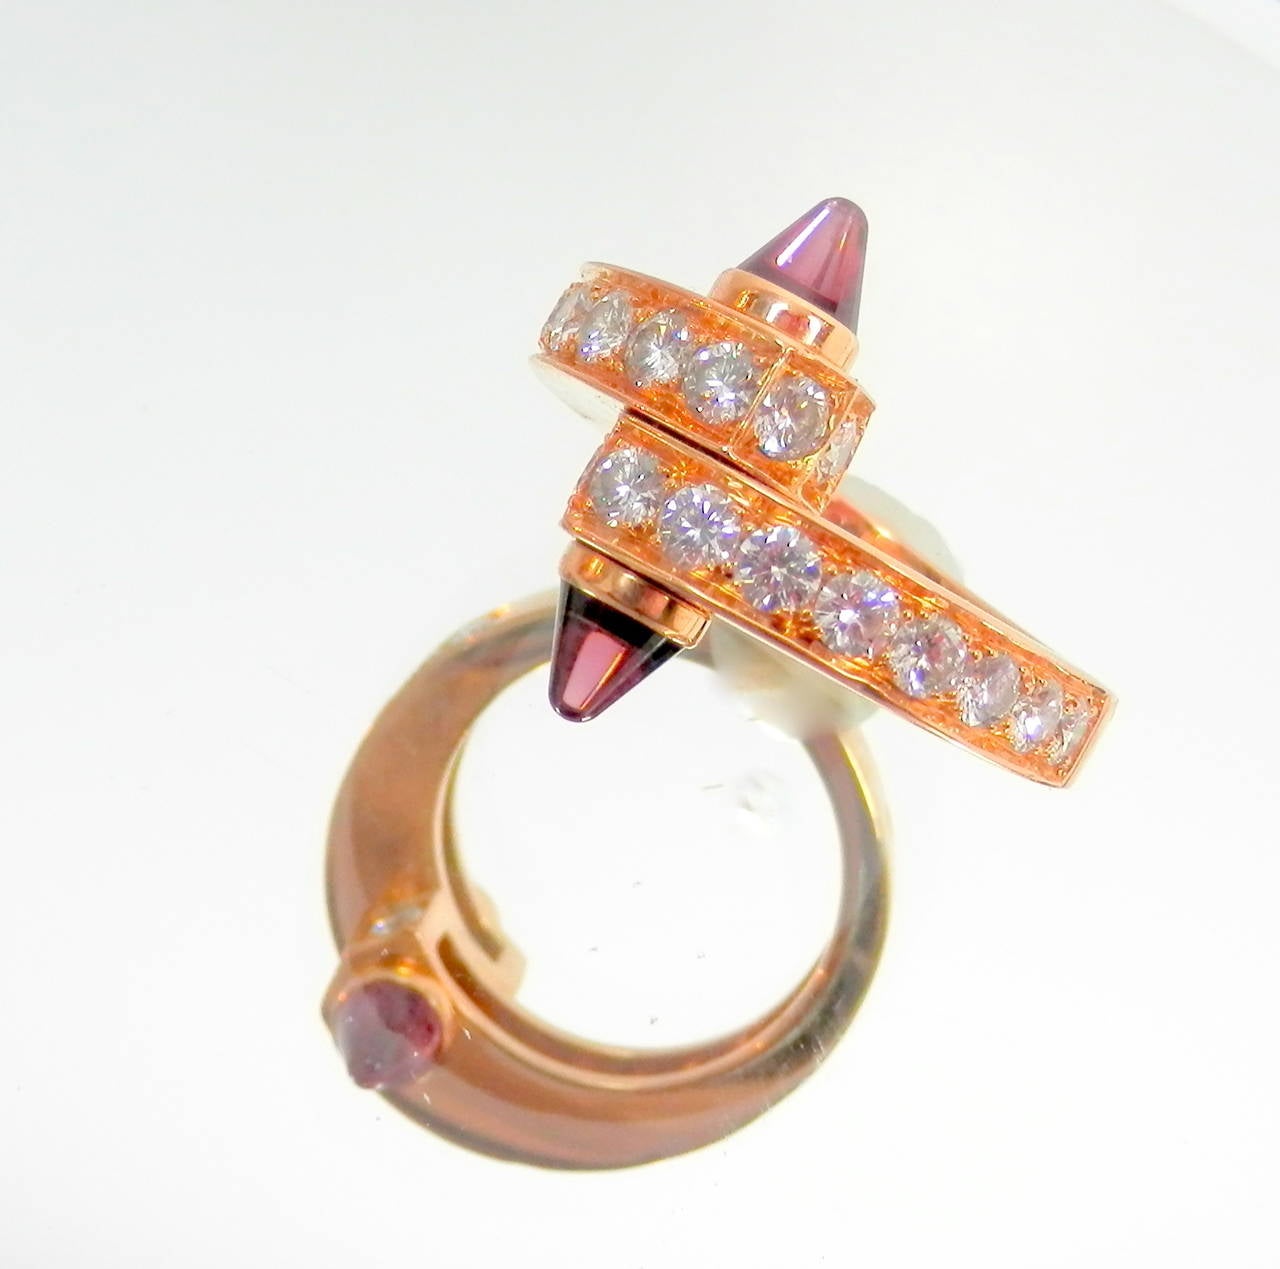 18K pink gold,  garnet and 20 diamonds with an average diamond color of E and VVS2  All the diamonds have an estimated weight of 1.68 cts.  The ring is signed Cartier, 750, numbered and with hallmarks.  Inside the shank is also the European ring